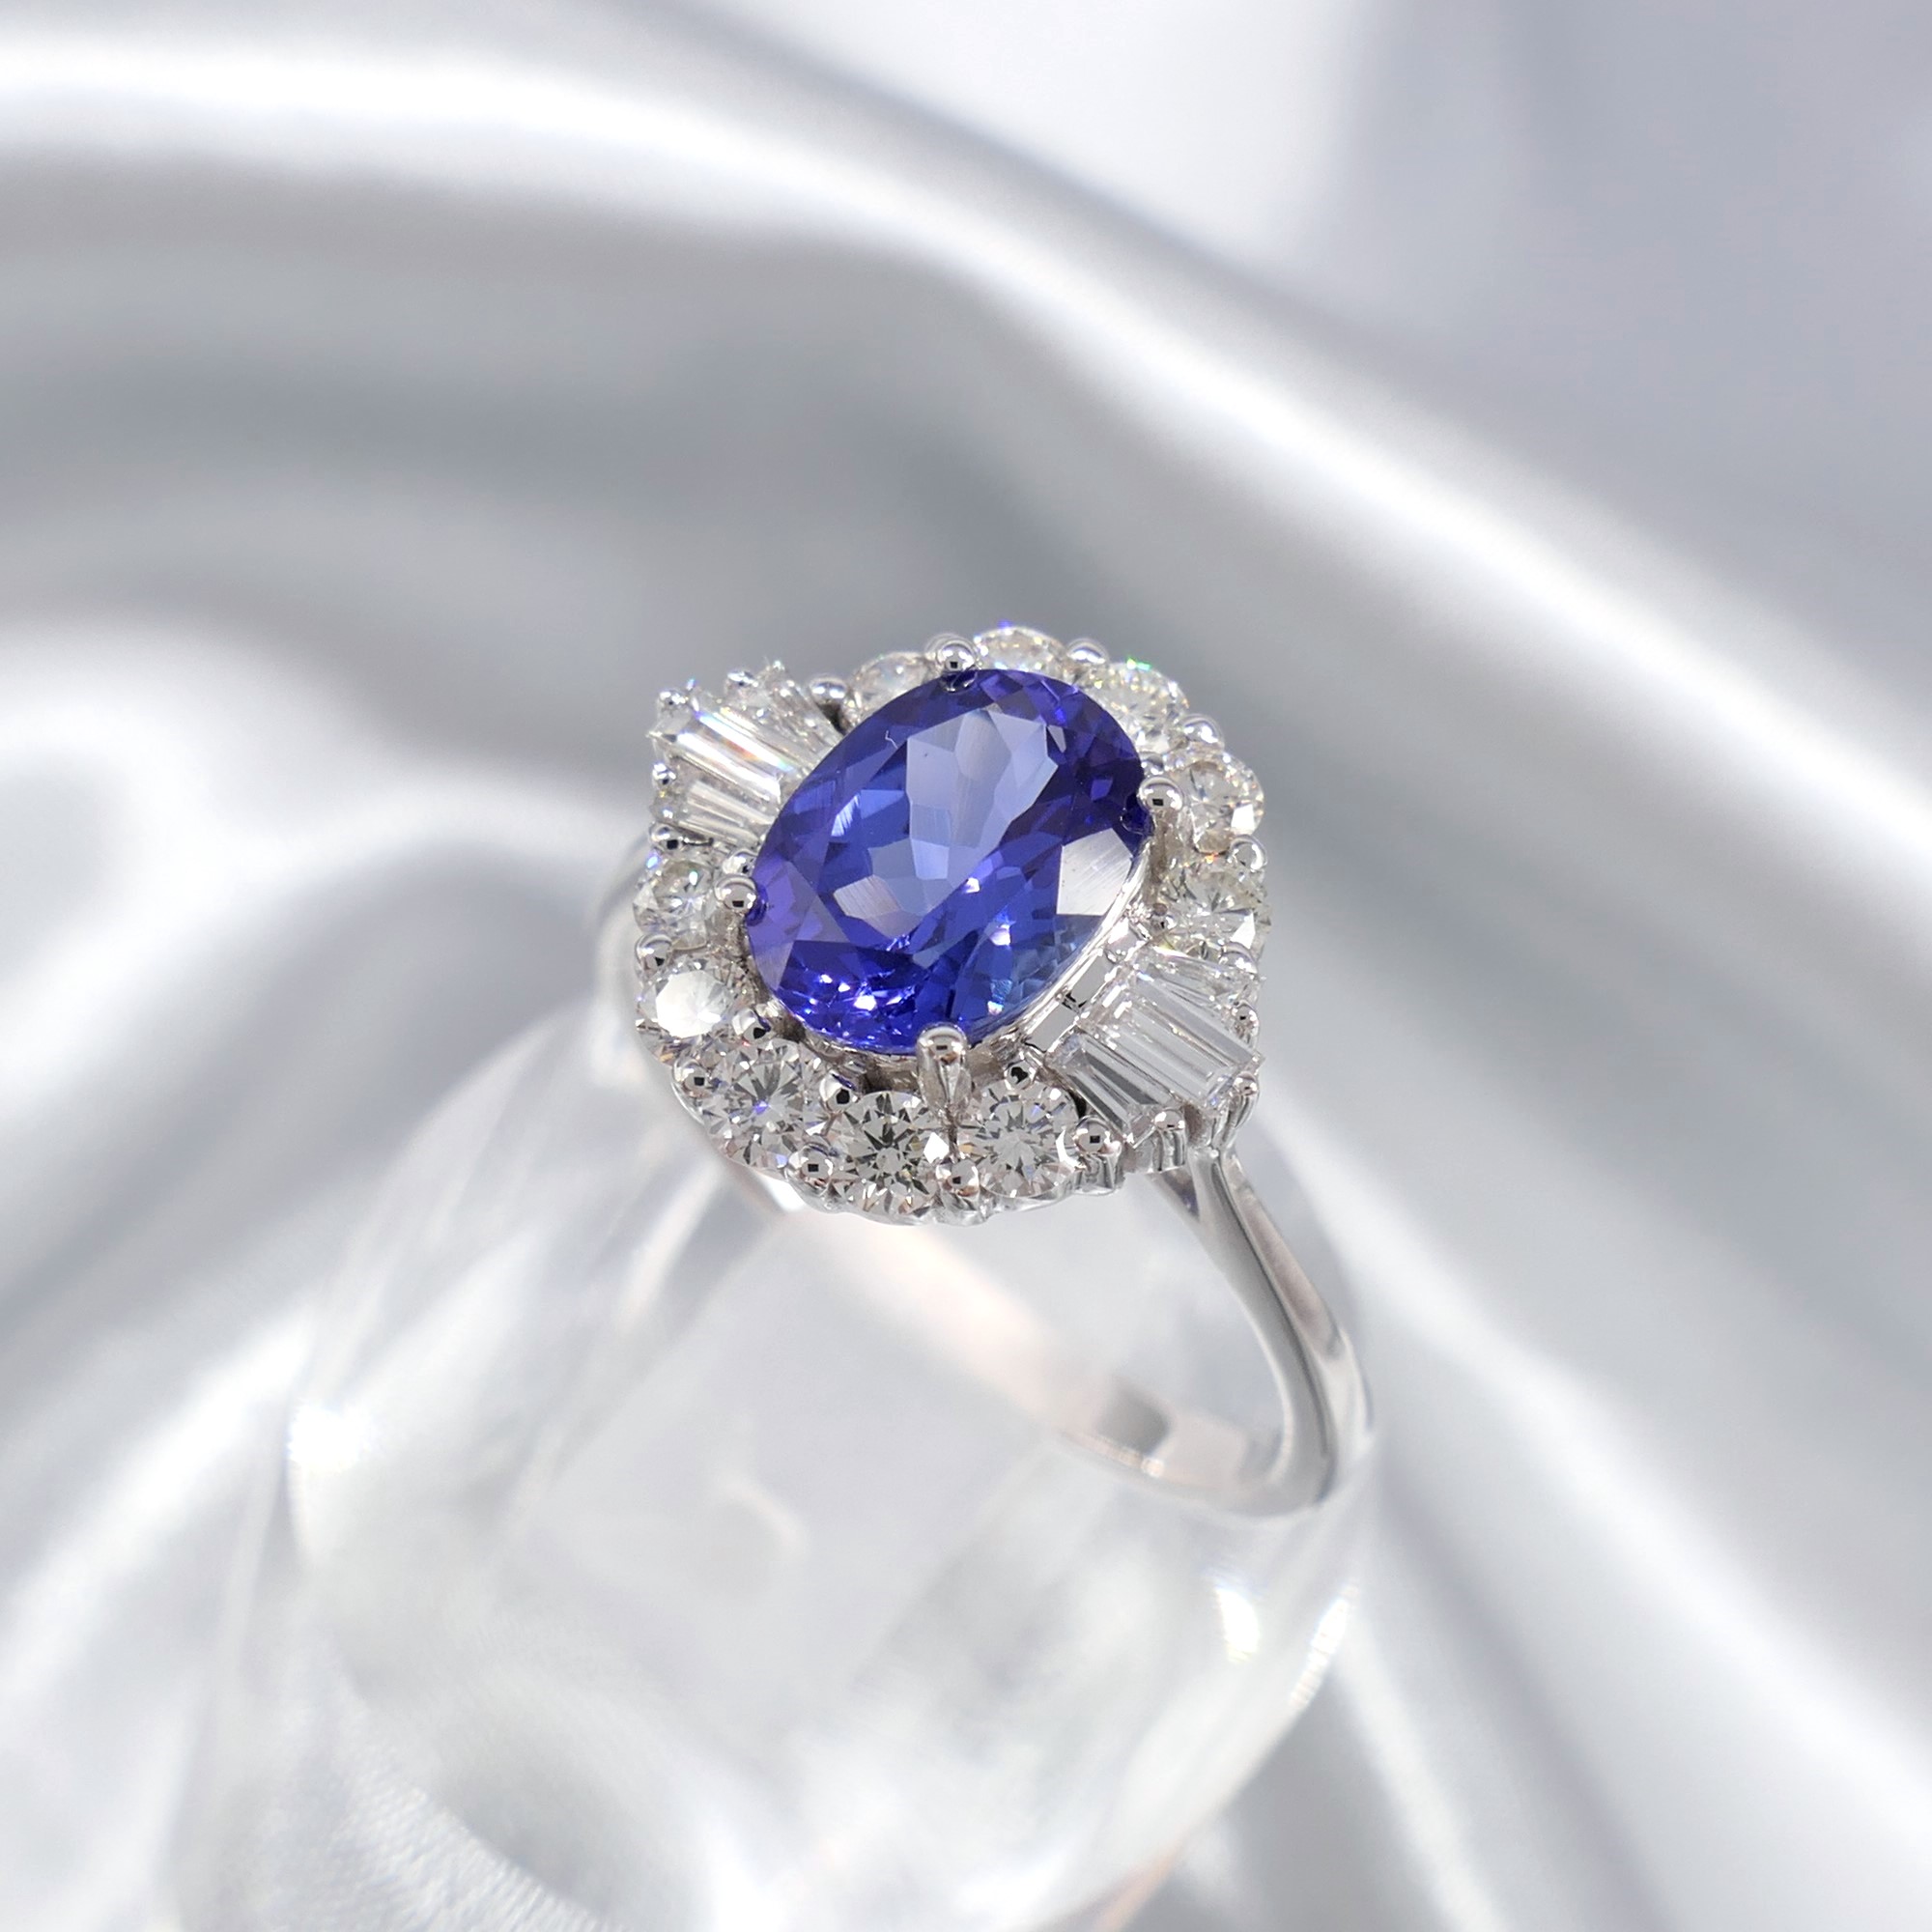 Stylish 1.37 Carat Tanzanite and 0.57 Carat Diamond Cluster Ring In 18ct White Gold - Image 6 of 7